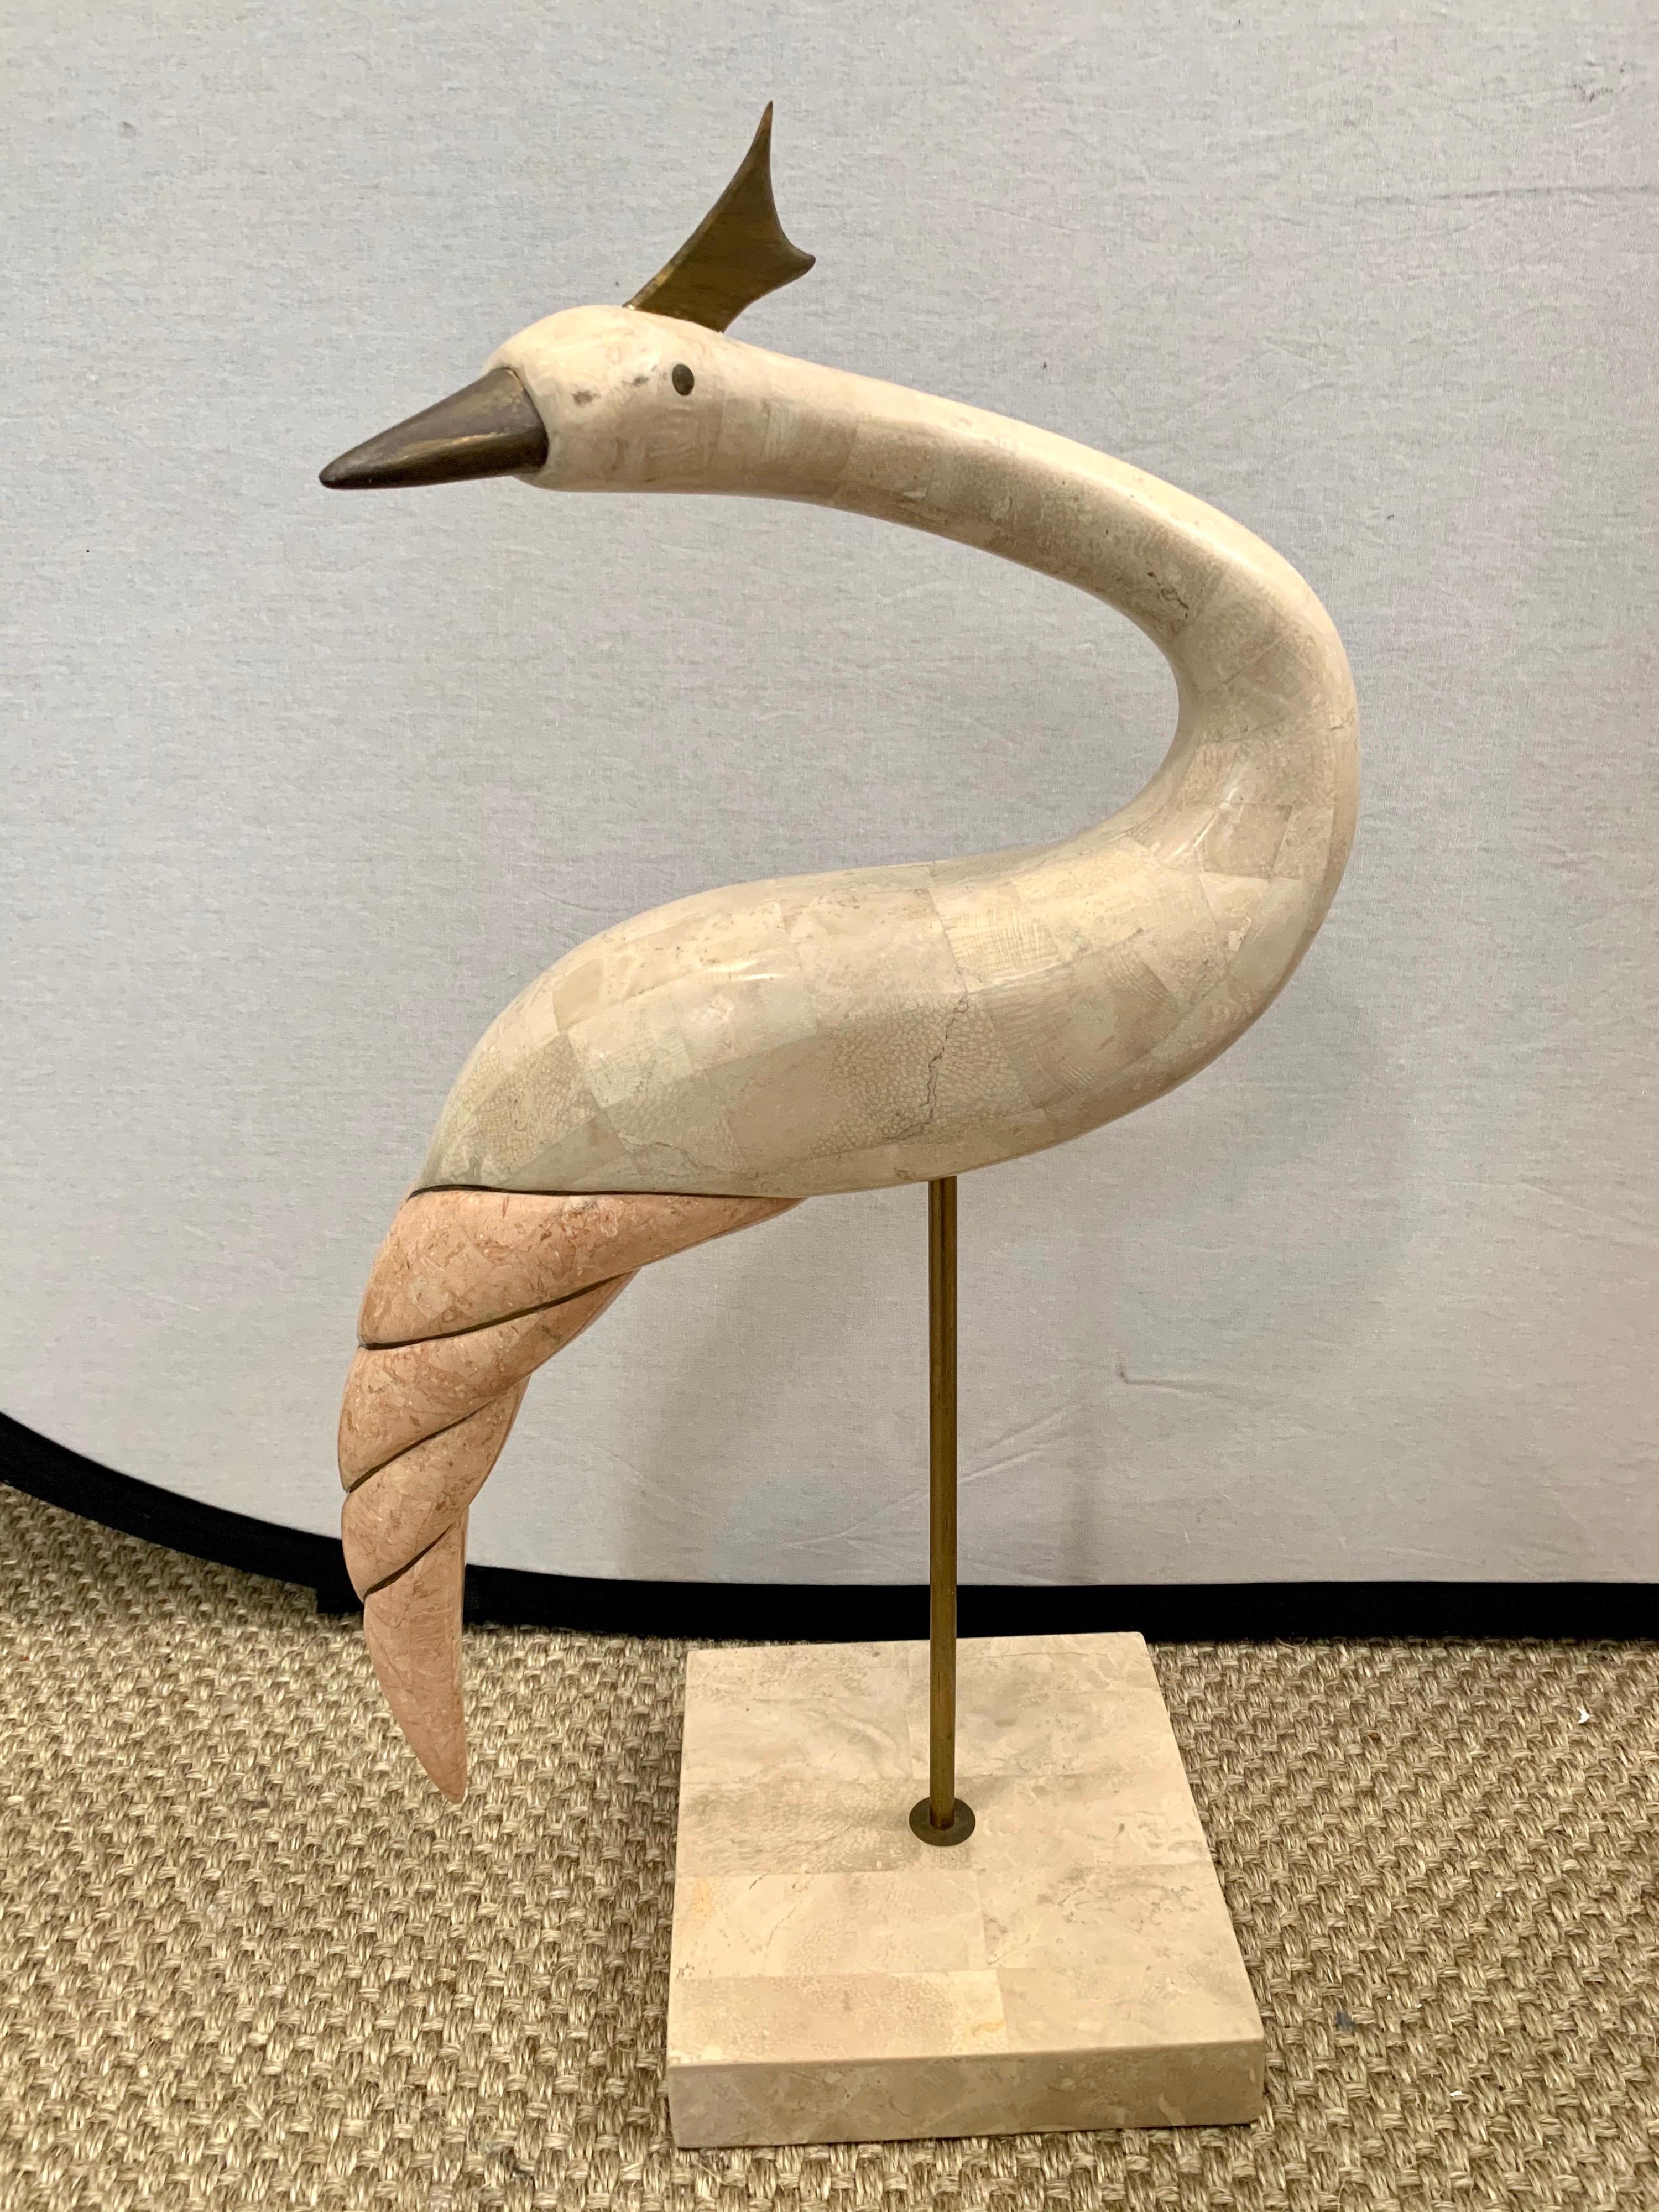 Pair of Hollywood Regency style tall crane bird sculptures by Maitland Smith composed of tessellated stone and polished brass.